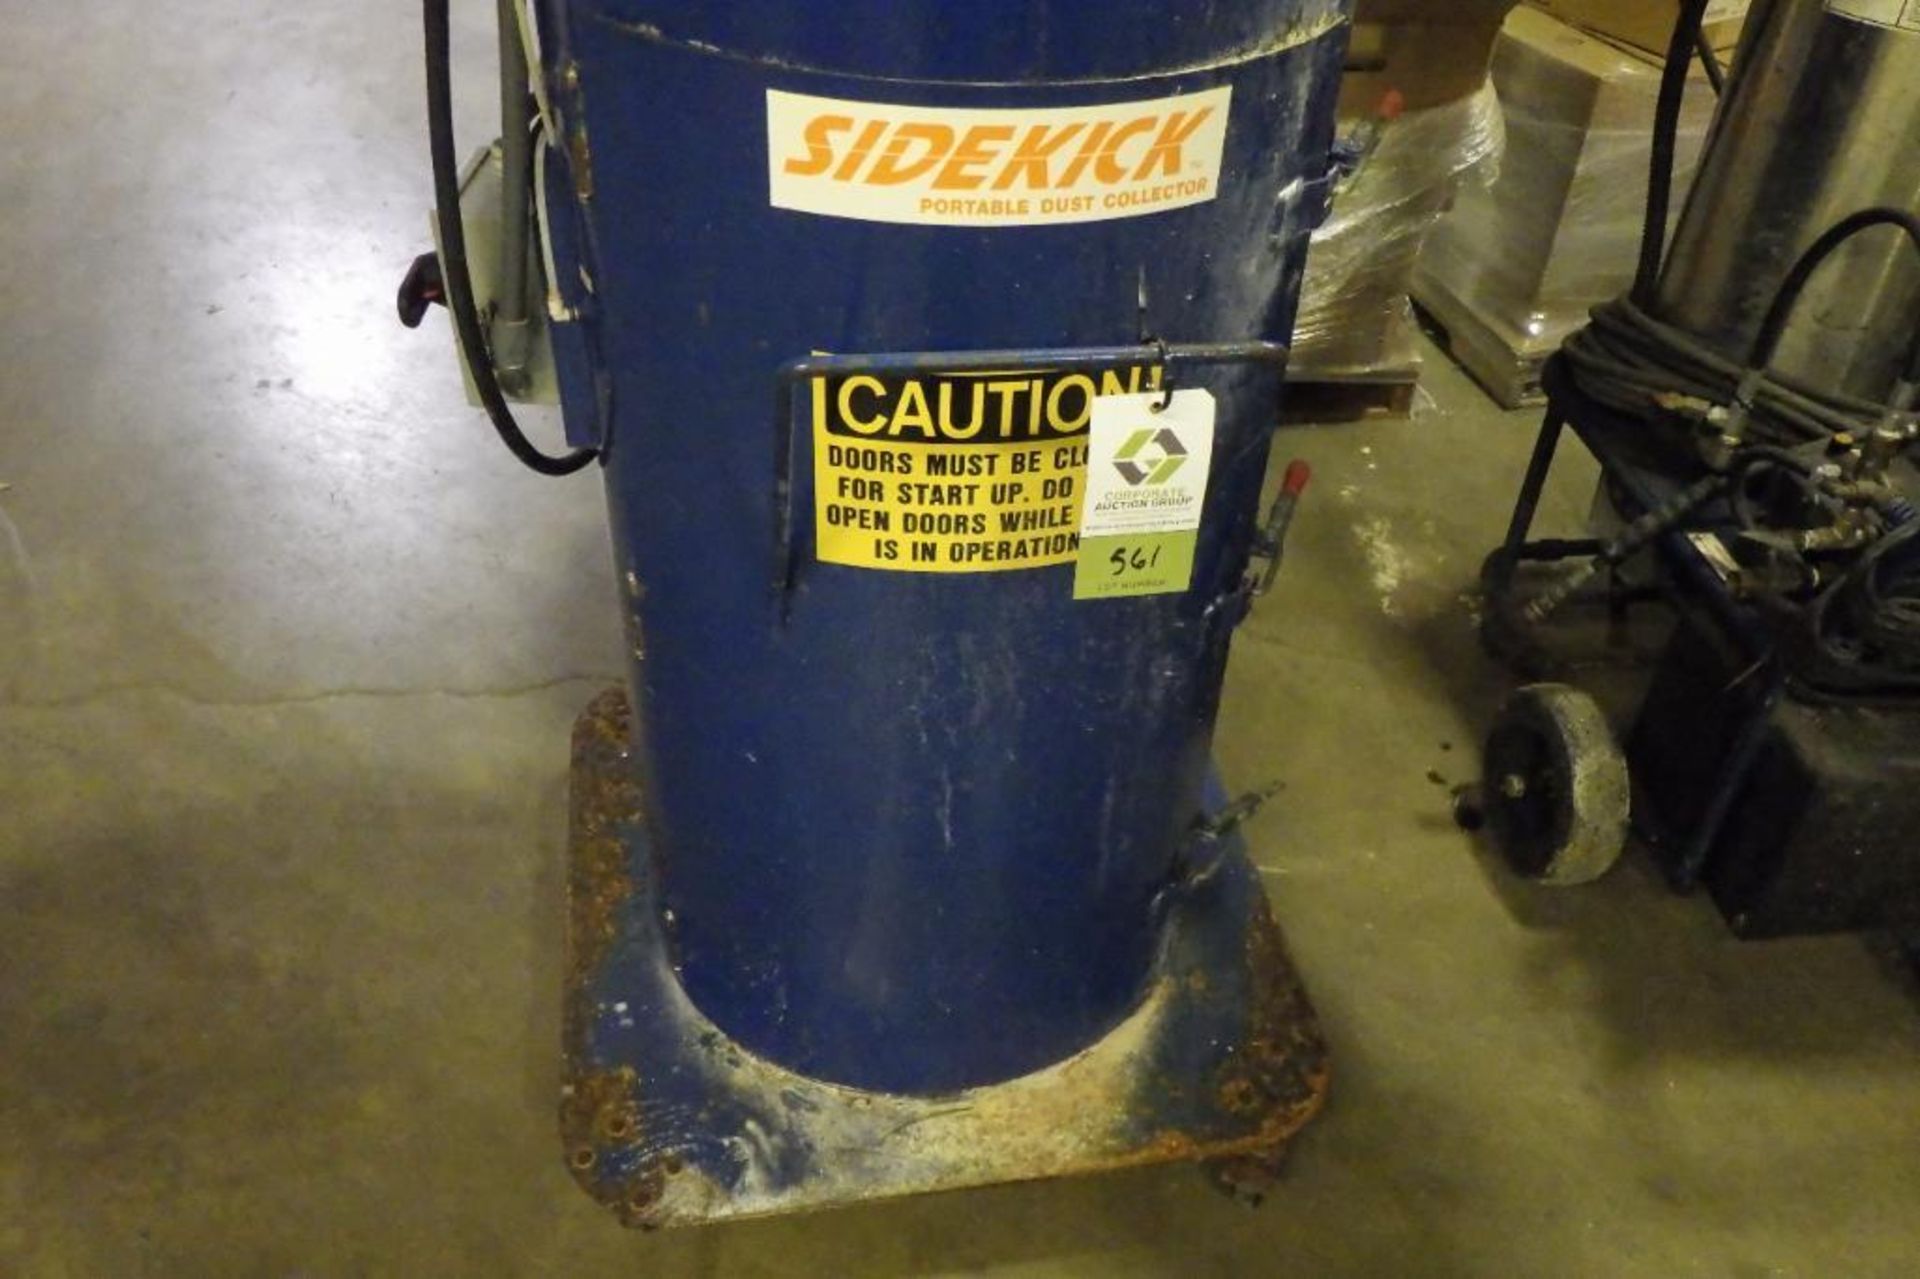 ProVent sidekick portable dust collector - Image 6 of 9